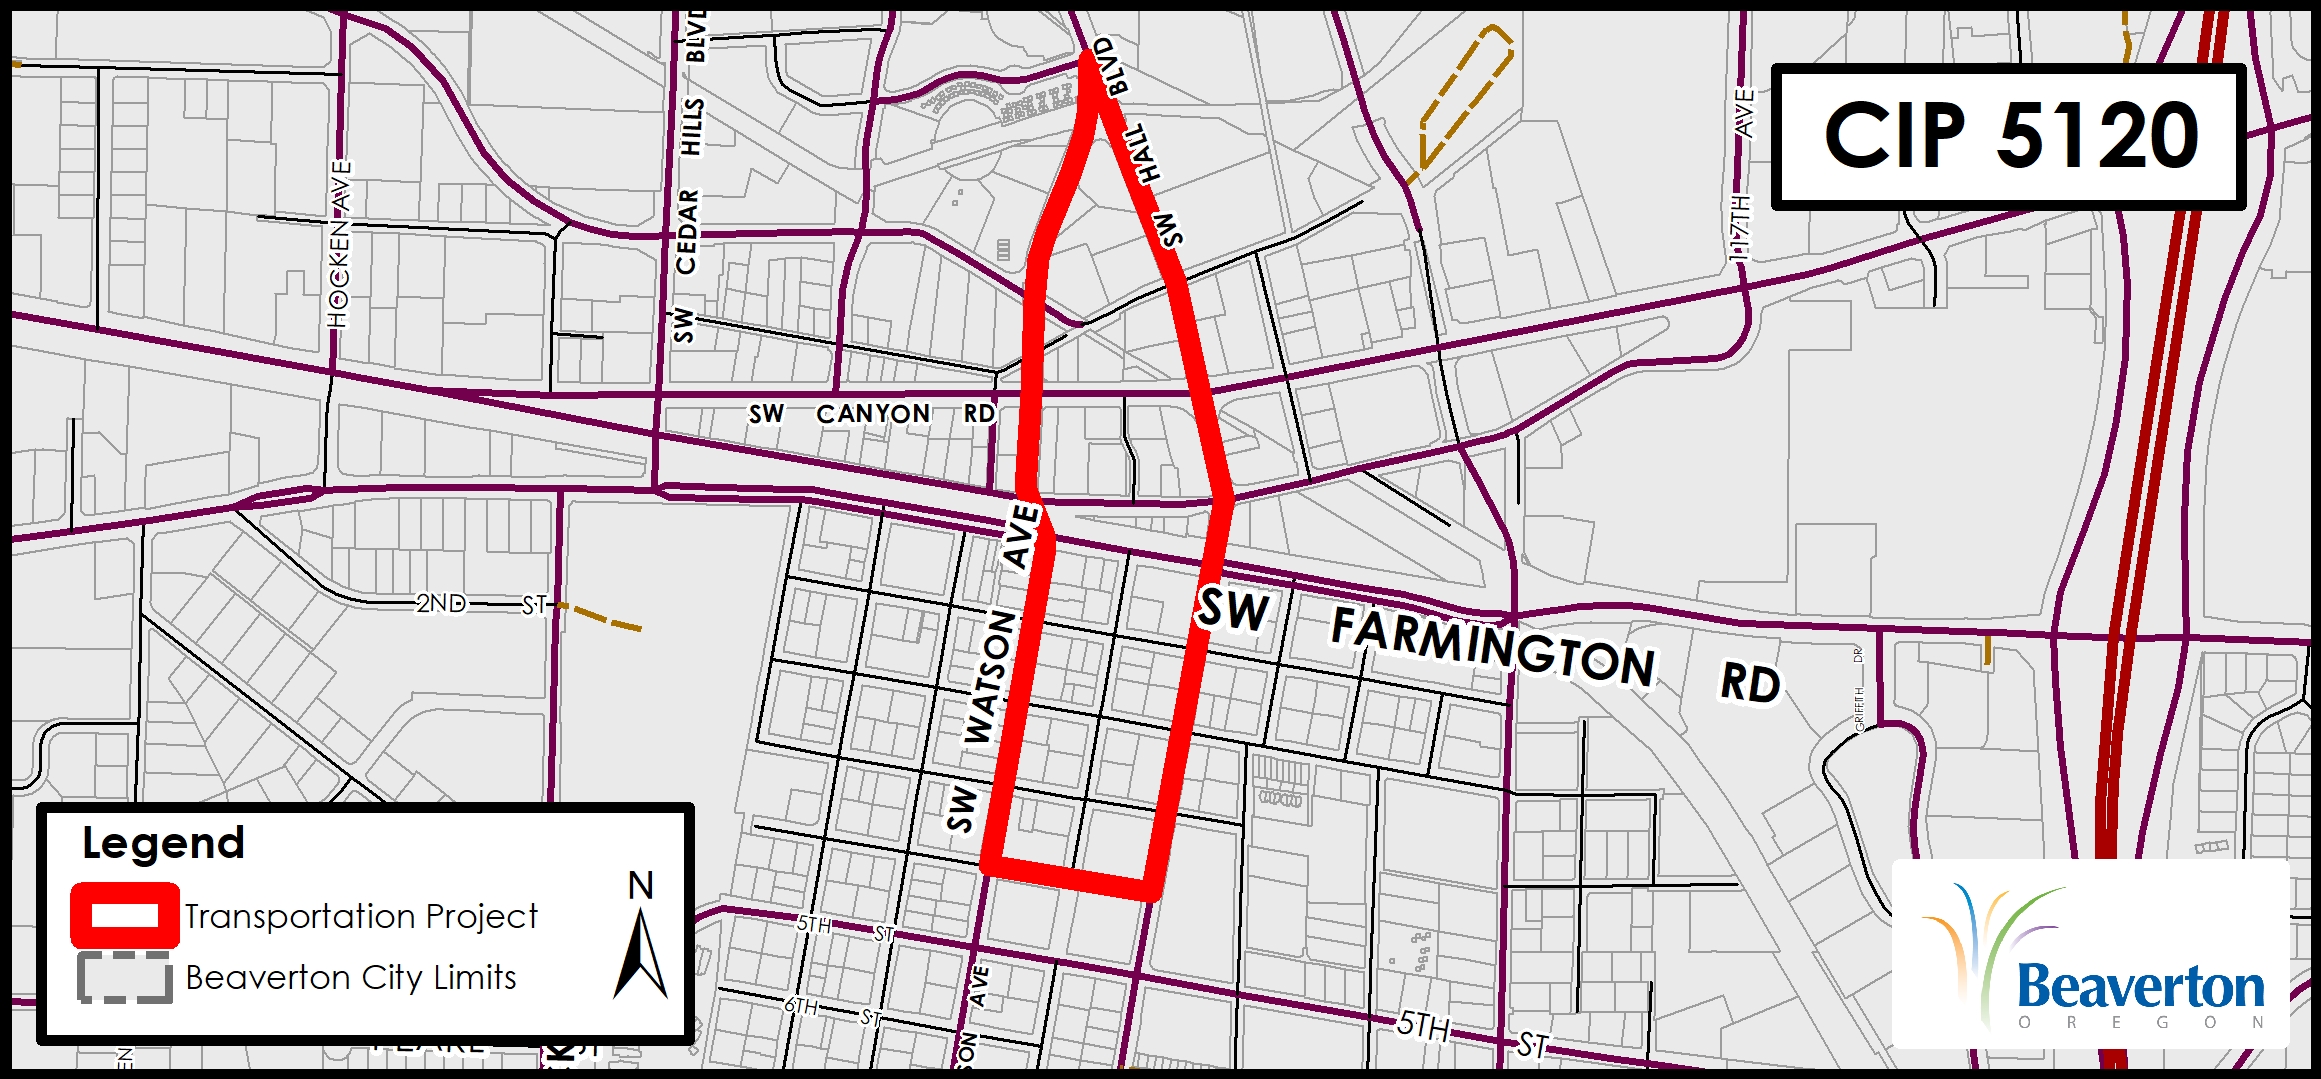 Transportation Capital Improvement Project 5120 for SW Watson Avenue, SW Hall Boulevard and SW 3rd Street.